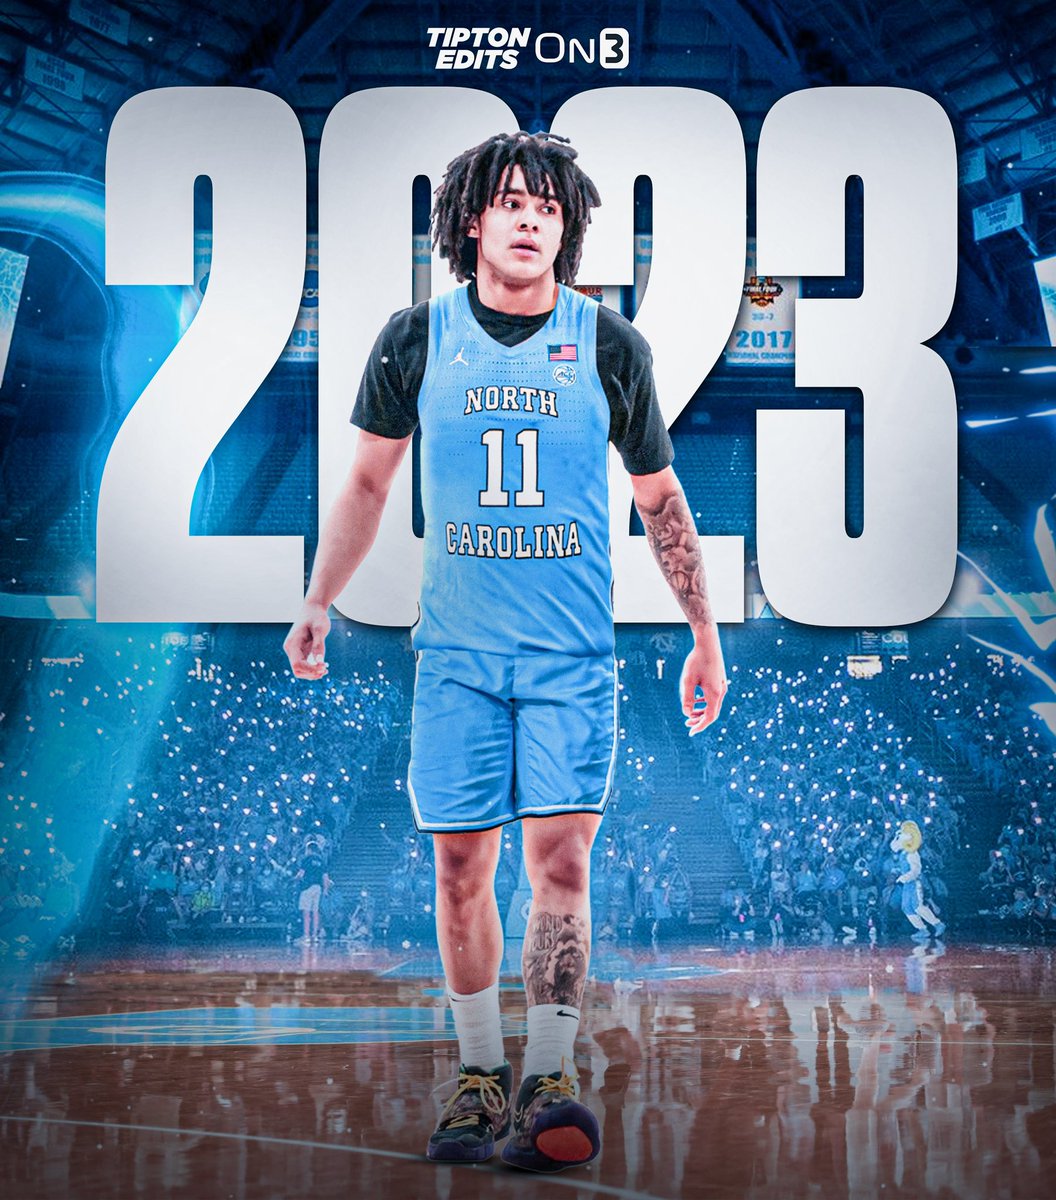 NEWS: Five-star PG Elliot Cadeau, a North Carolina commit, will reclassify to the 2023 class, joining the Tar Heels this upcoming season. Story: on3.com/college/north-…